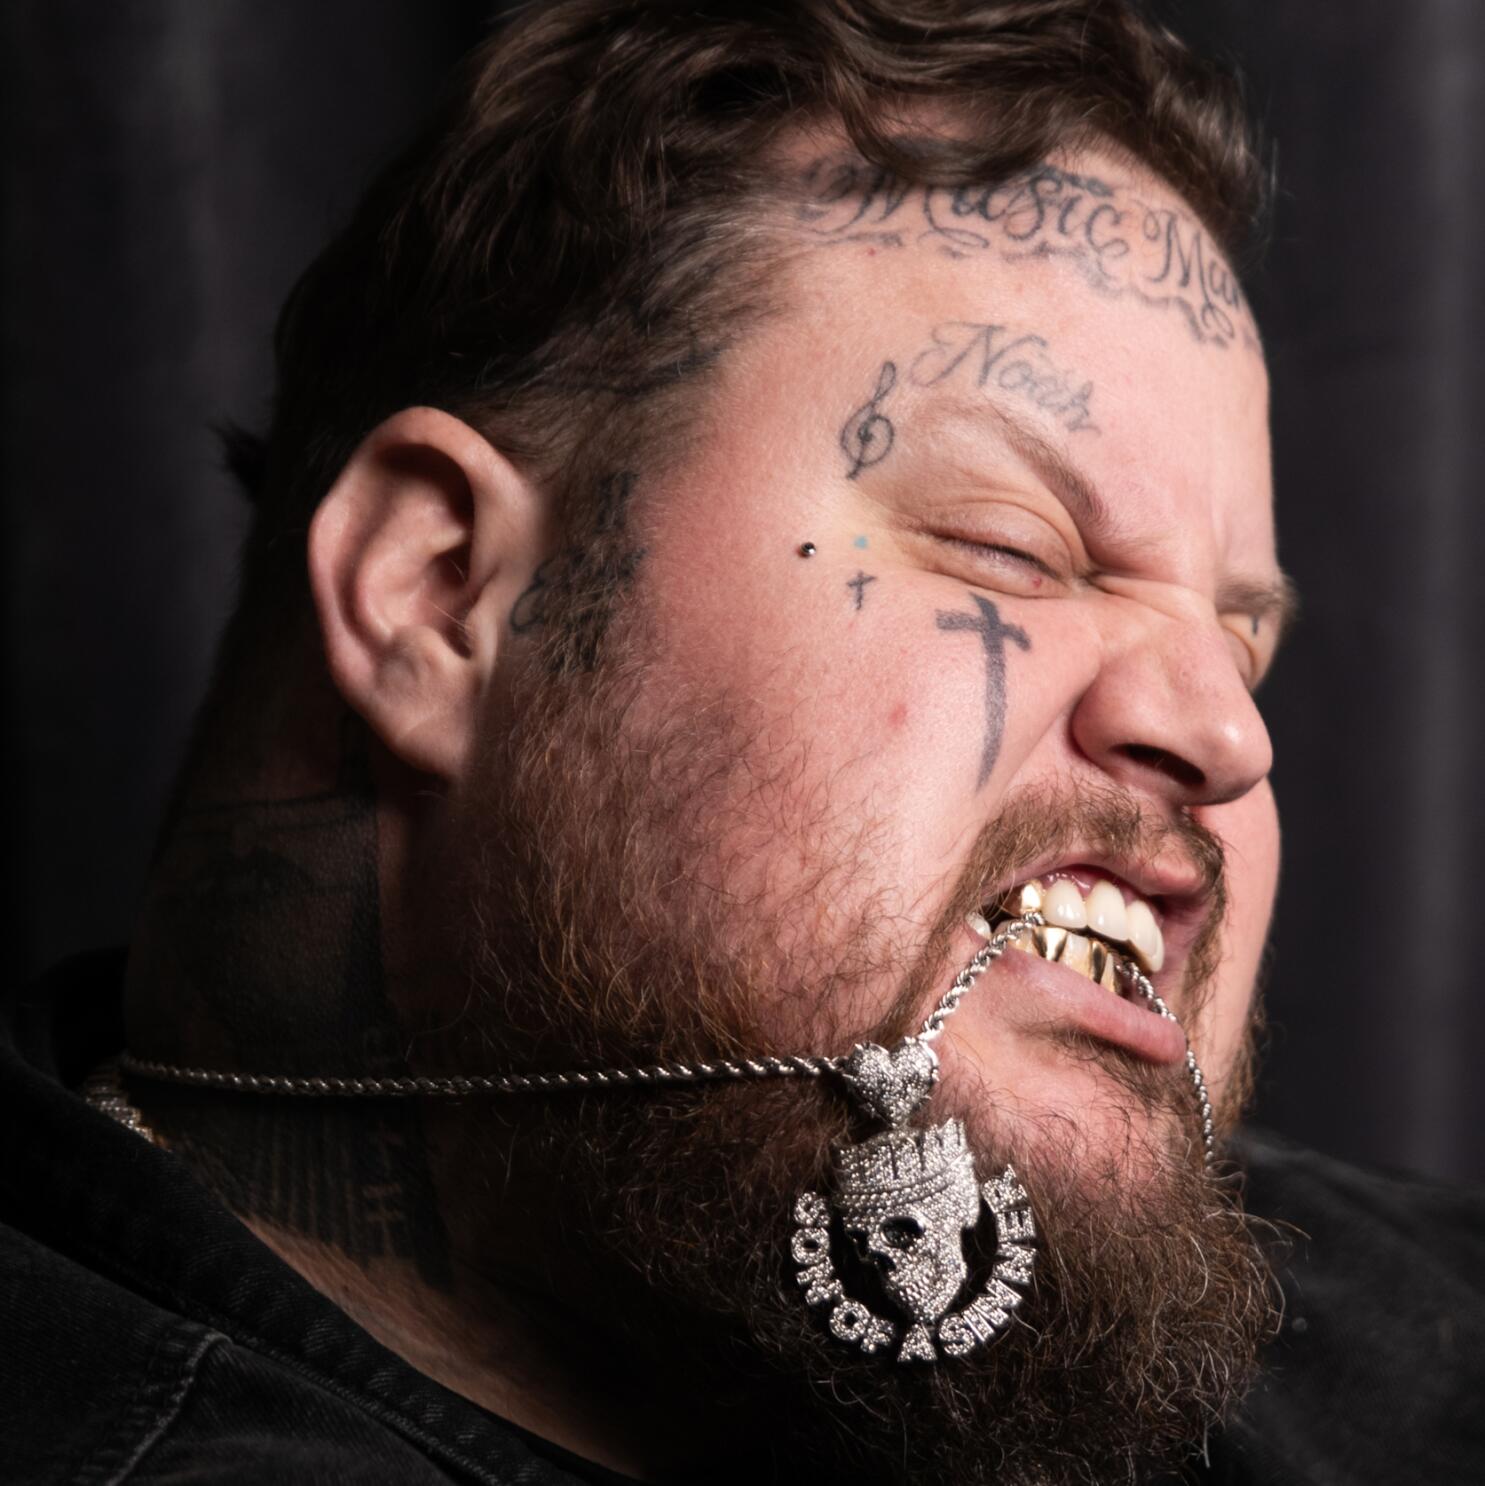 How Jelly Roll became the new (tattooed) face of country - Los Angeles Times